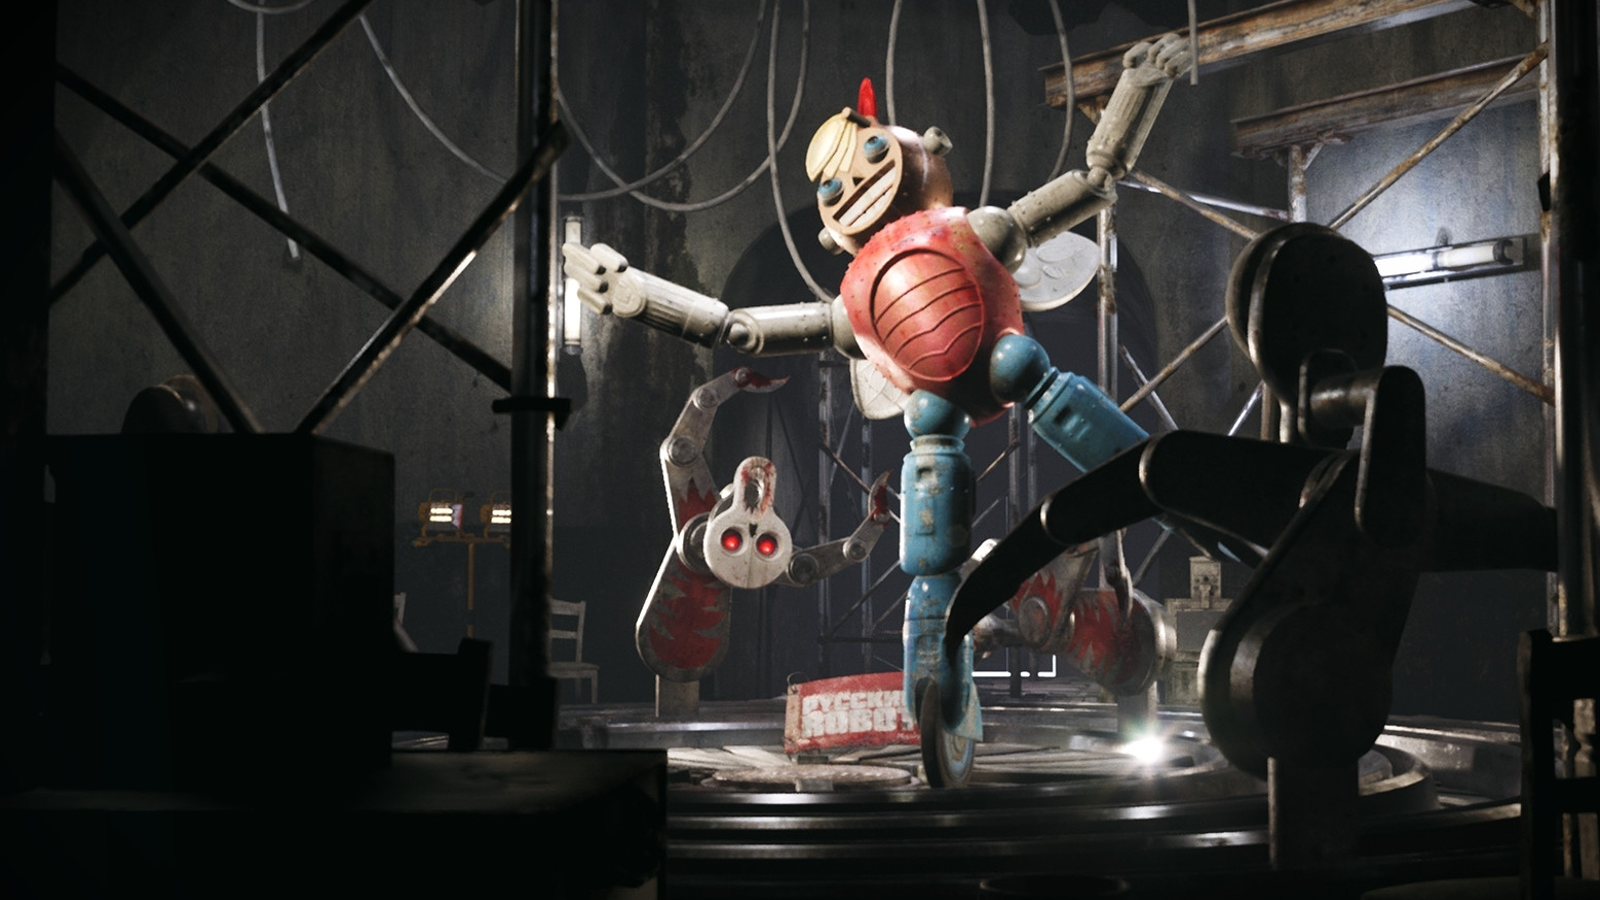 Easter eggs and USSR references in 'Atomic Heart' - Russia Beyond